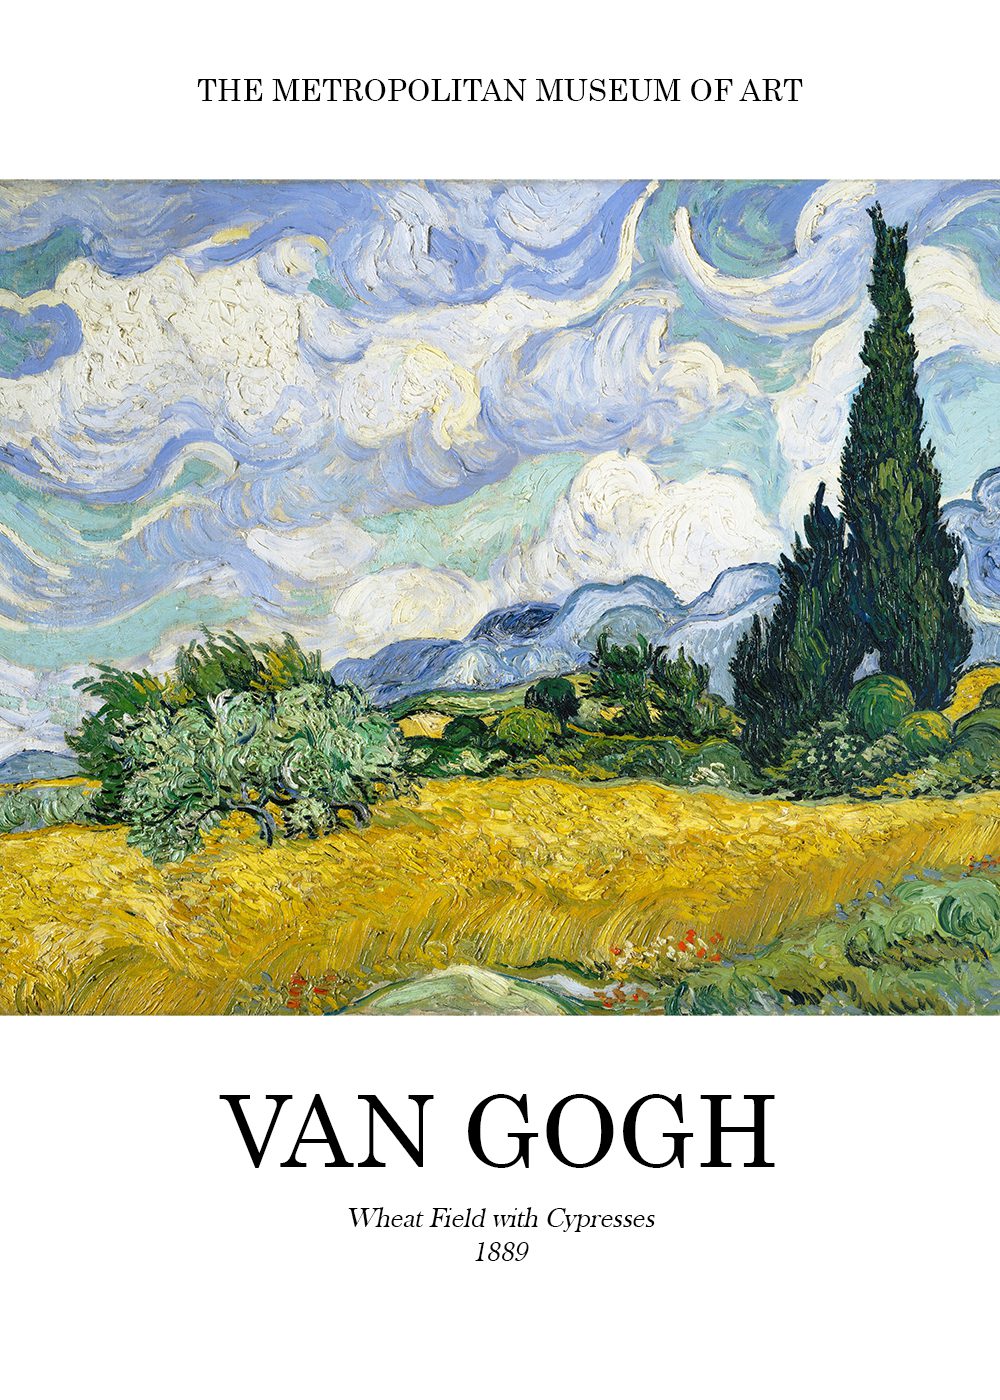 Wheat Field with Cypresses Van Gogh Poster